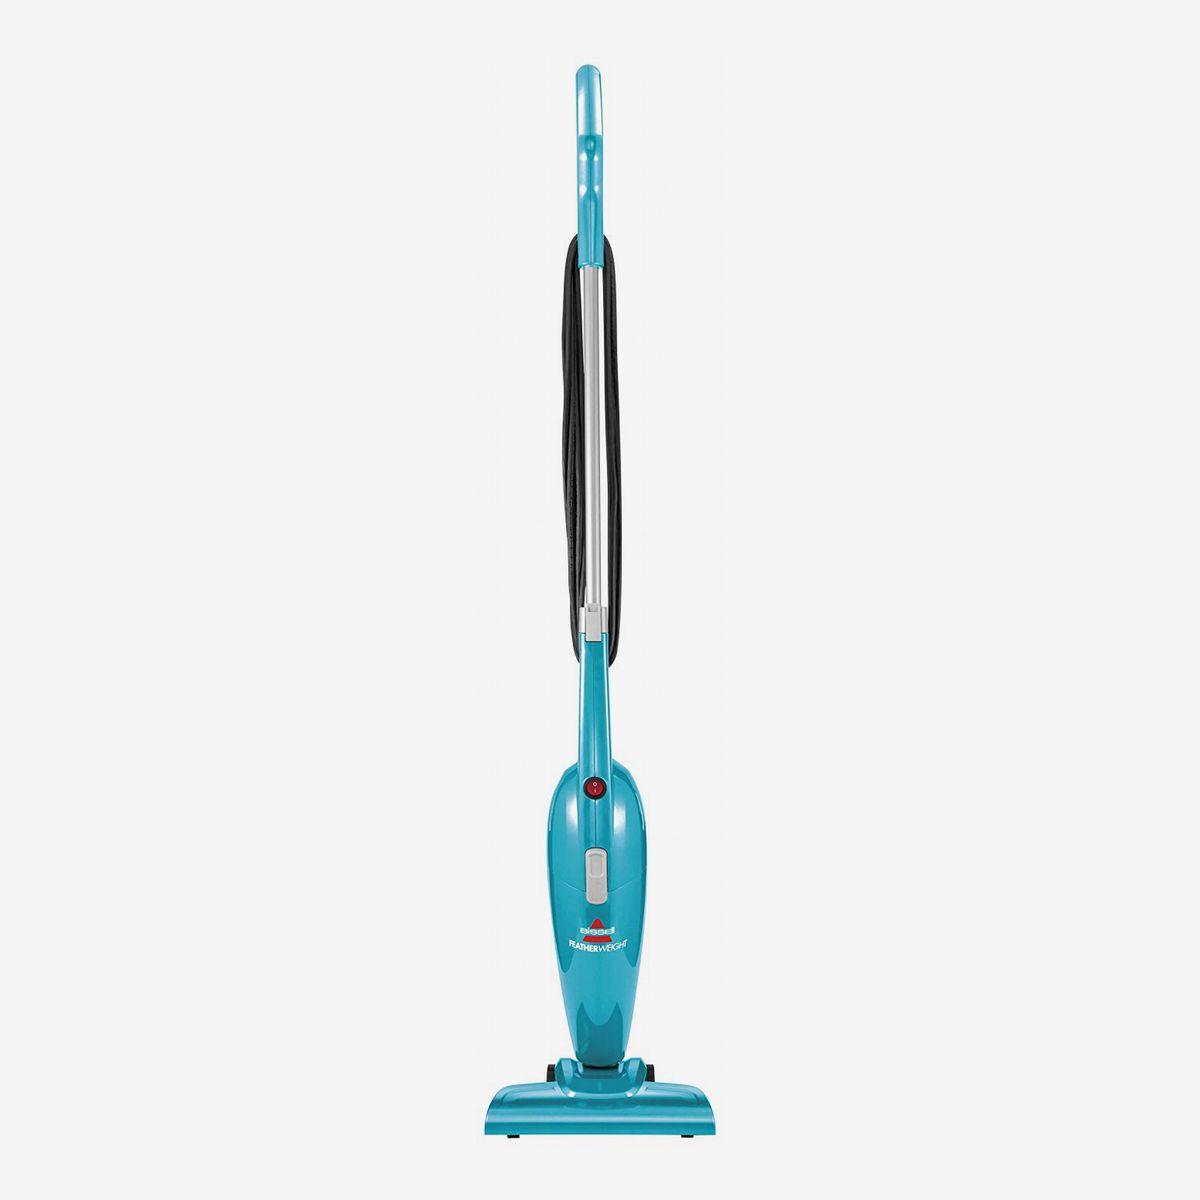 18 Best Vacuum Cleaners 2021 The, What Is The Best Upright Vacuum For Hardwood Floors